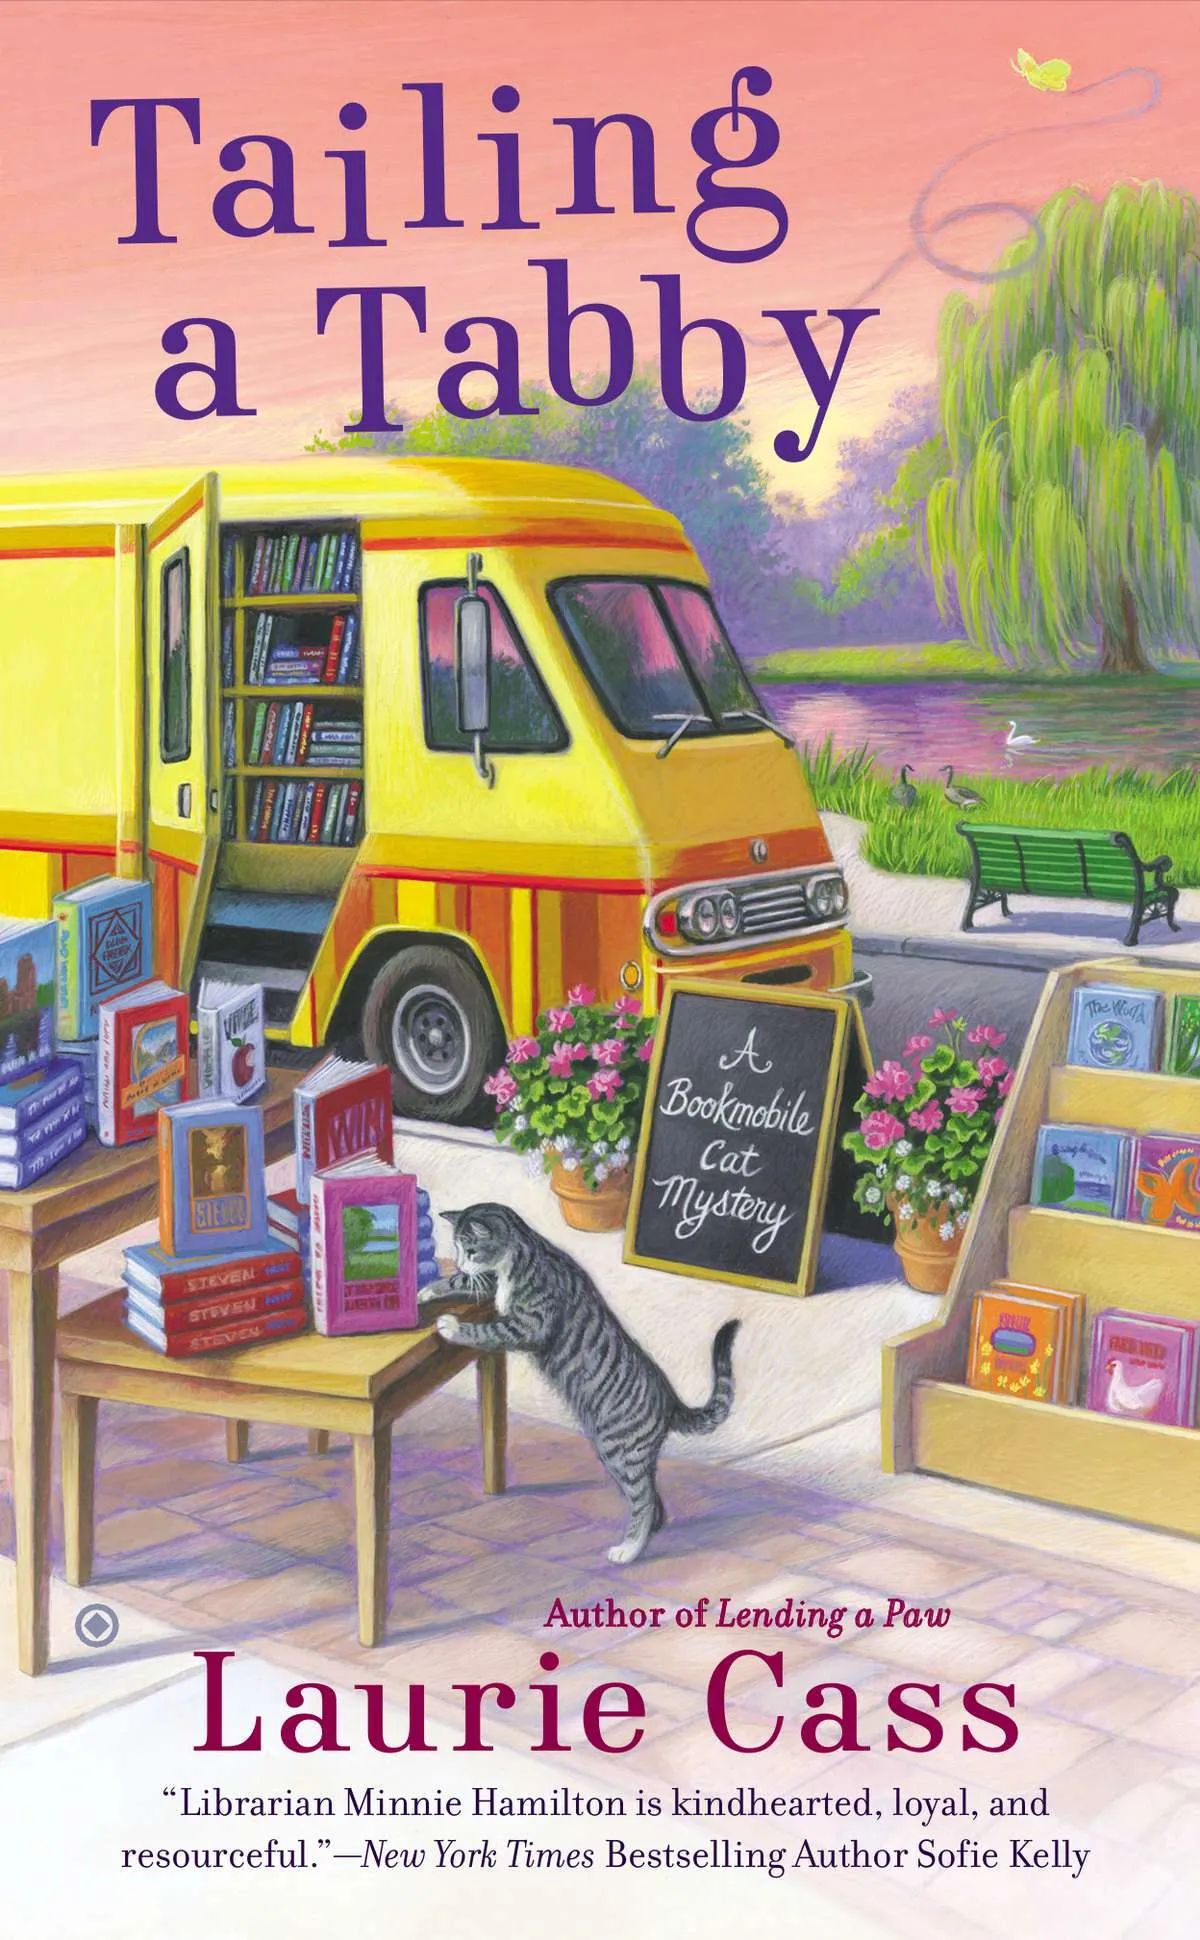 Tailing a Tabby (A Bookmobile Cat Mystery #2)